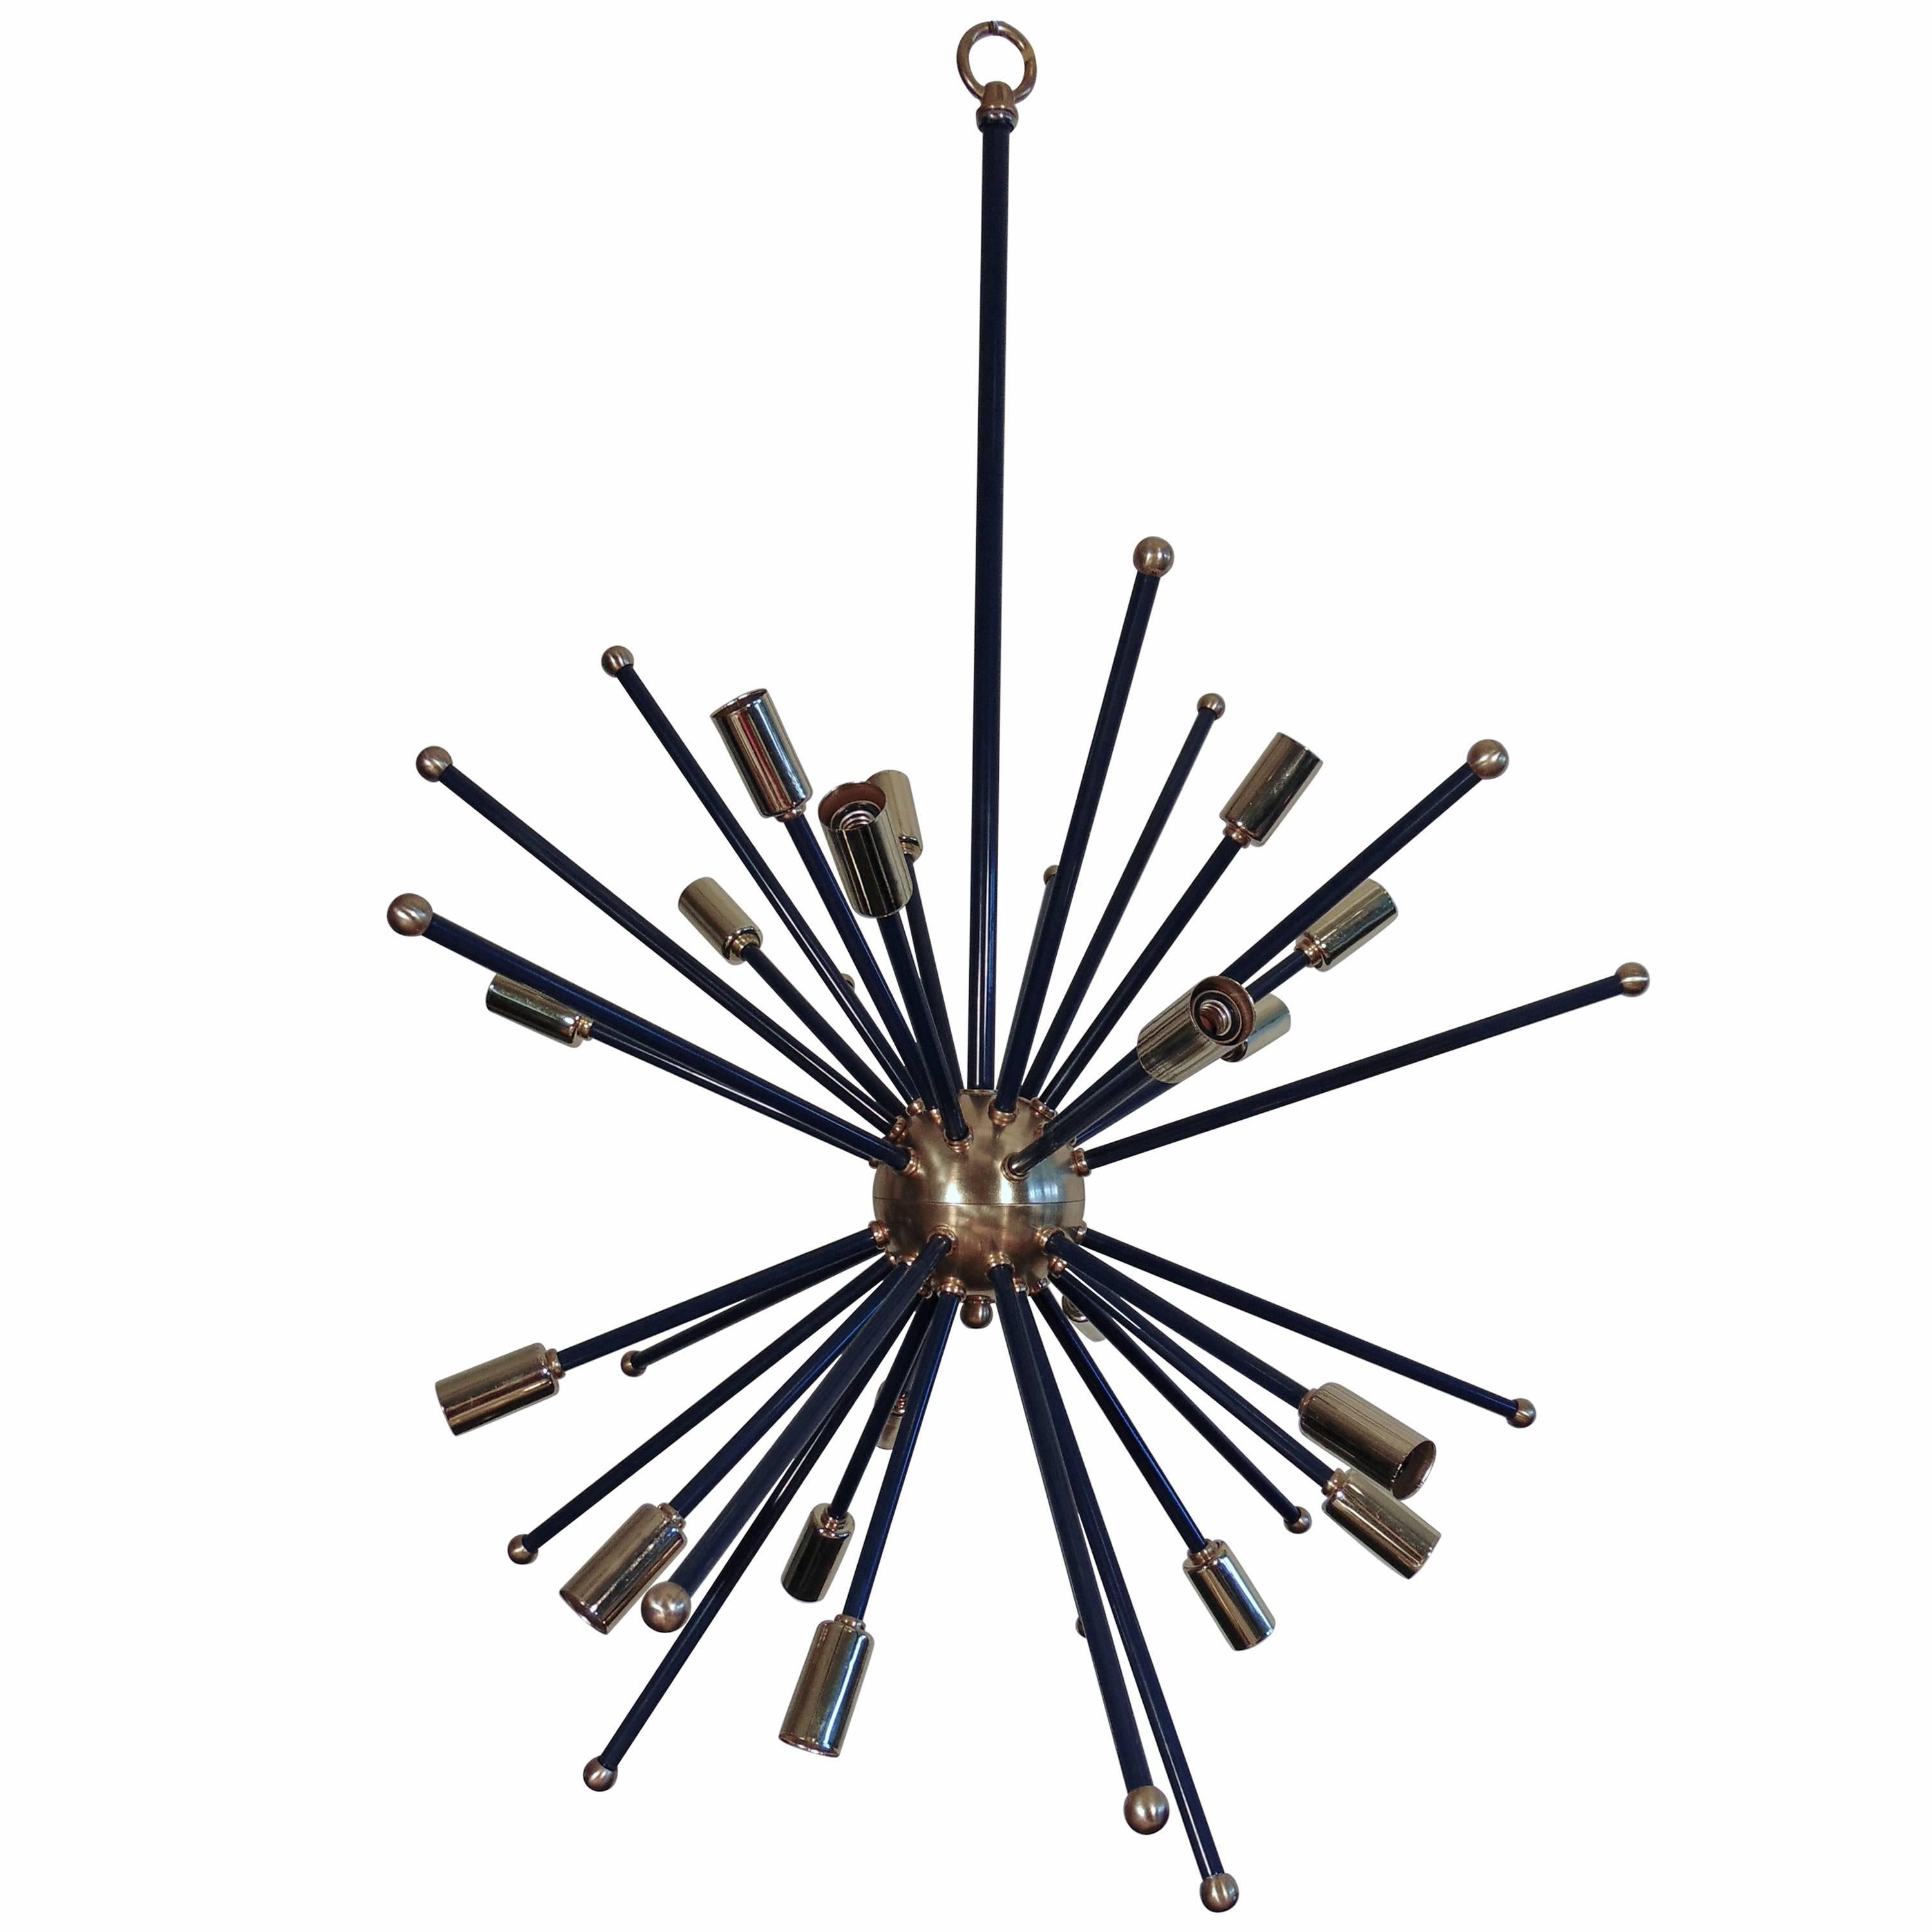 "Etoile" Sputnik Style Chandelier, made in the USA, by Lou Blass with 18 lights For Sale